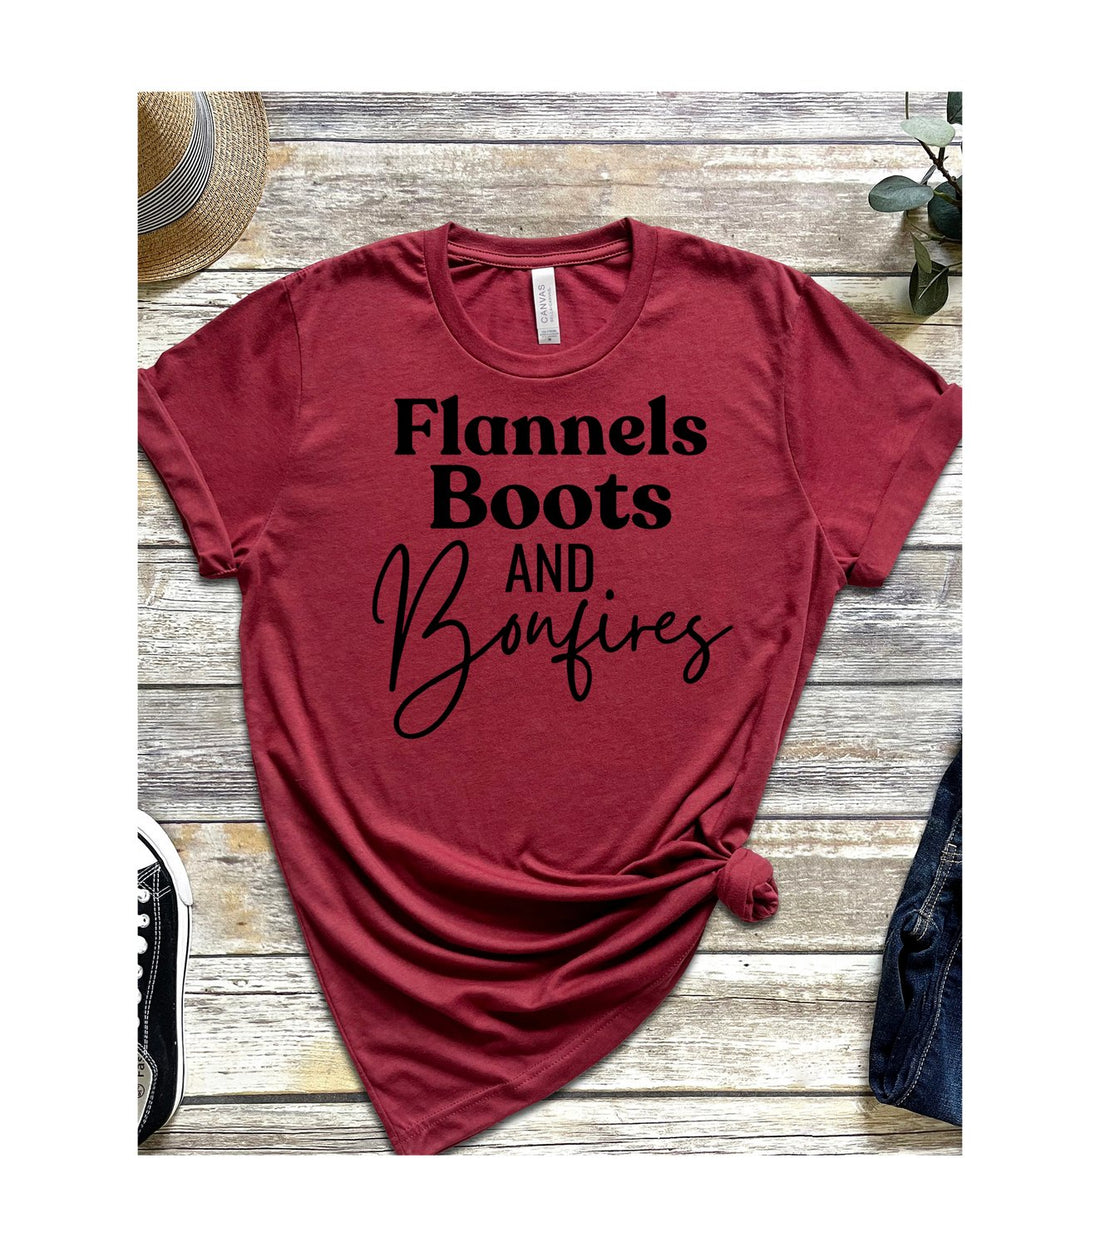 Flannel Boots and Bonfires - T-Shirts - Positively Sassy - Flannel Boots and Bonfires